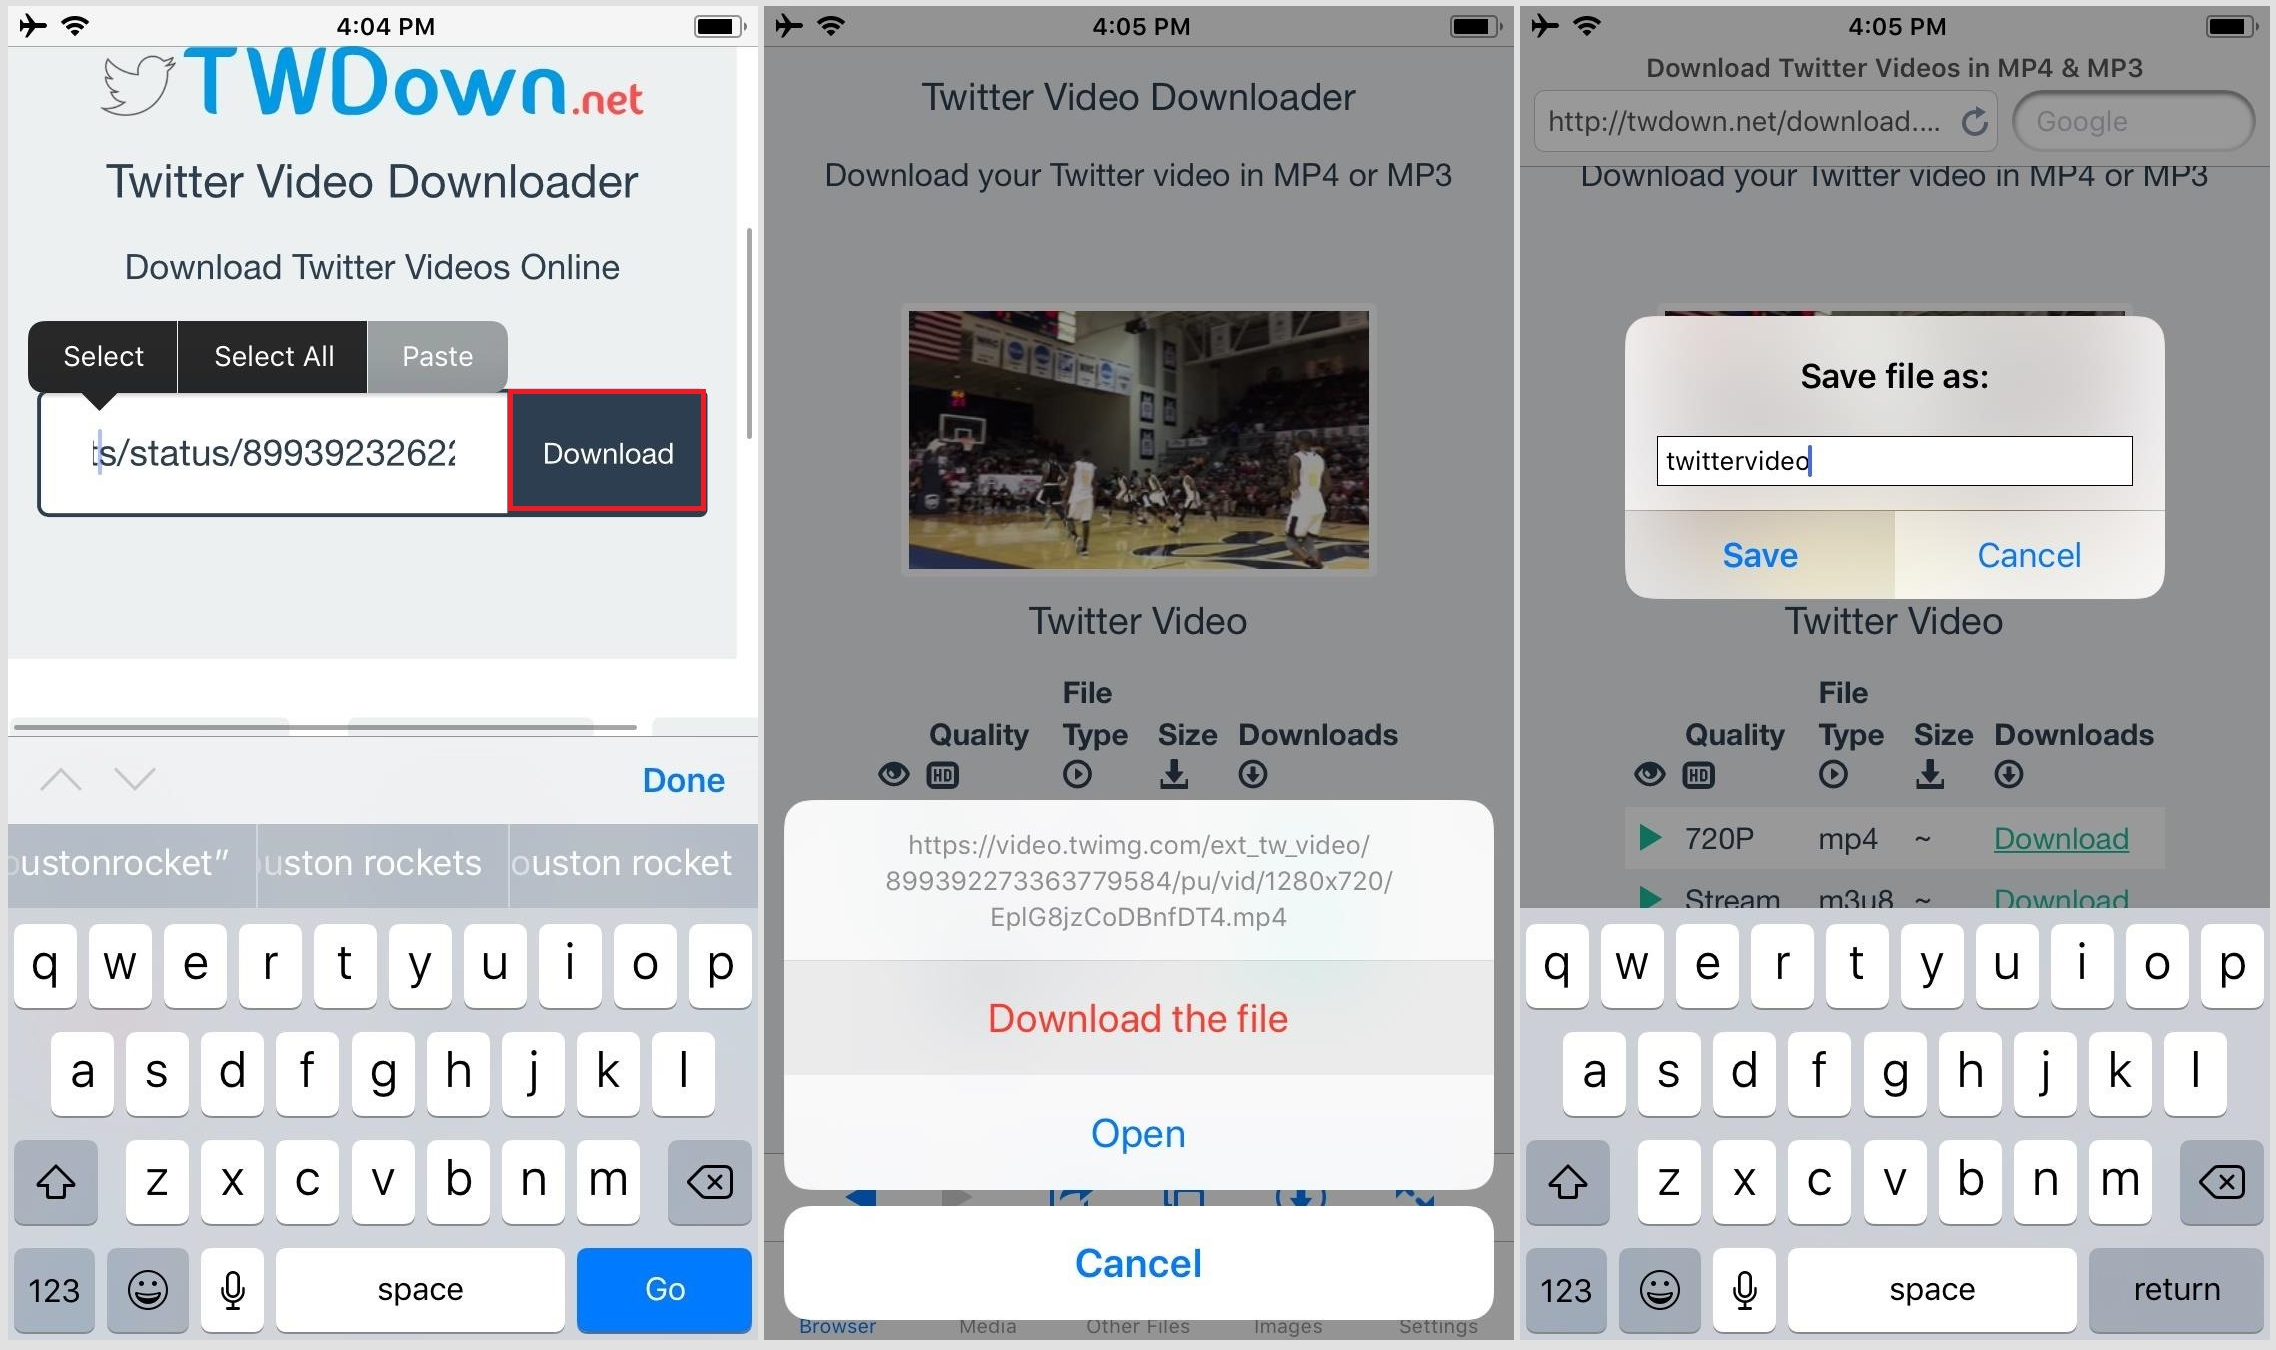 Download Twitter Videos on iPhone | Leawo Tutorial Center